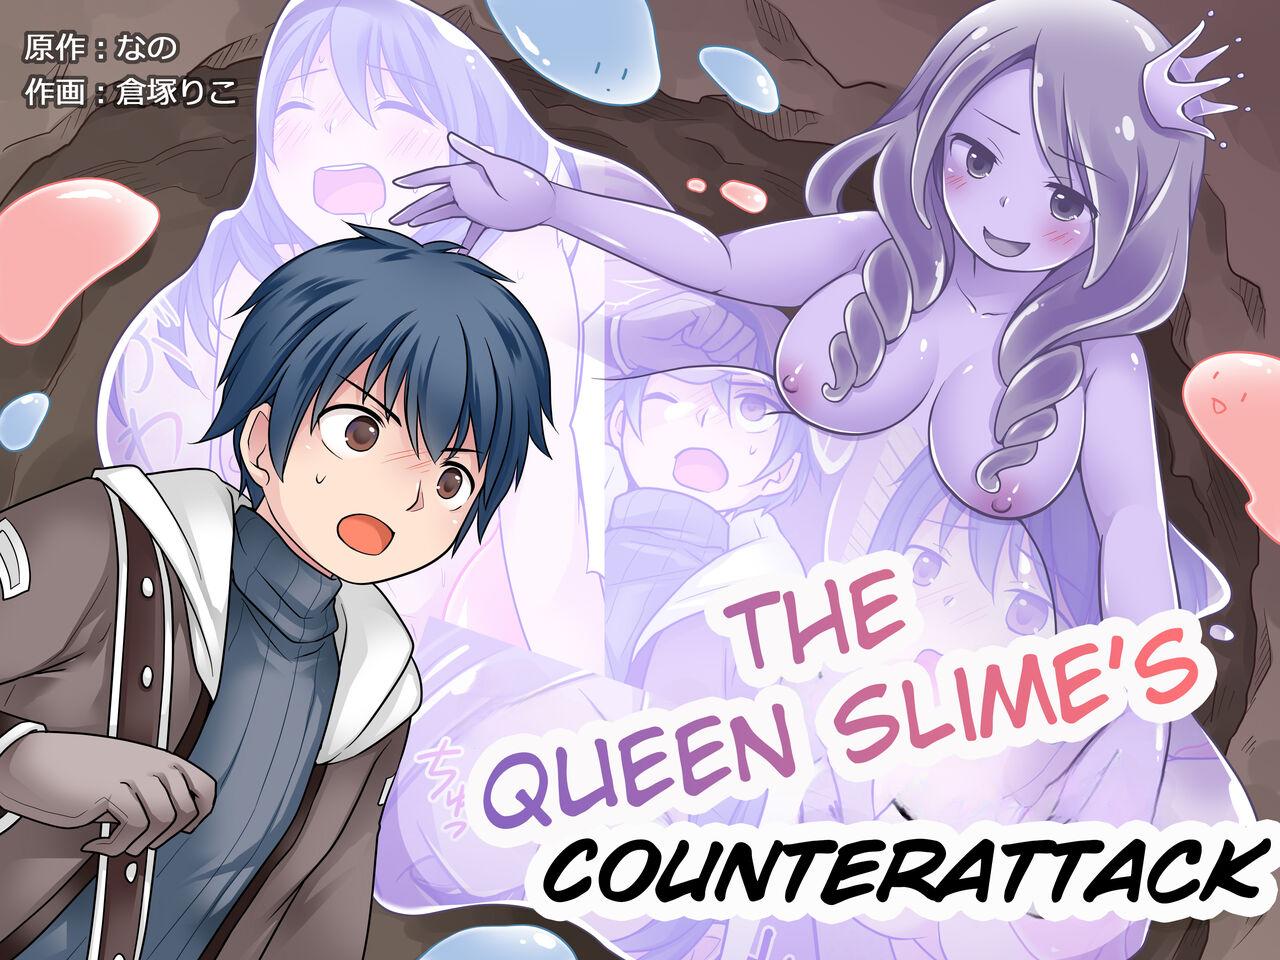 Gay Queen Slime no Gyakushuu | The Queen Slime's Counterattack - Original Linda - Page 1